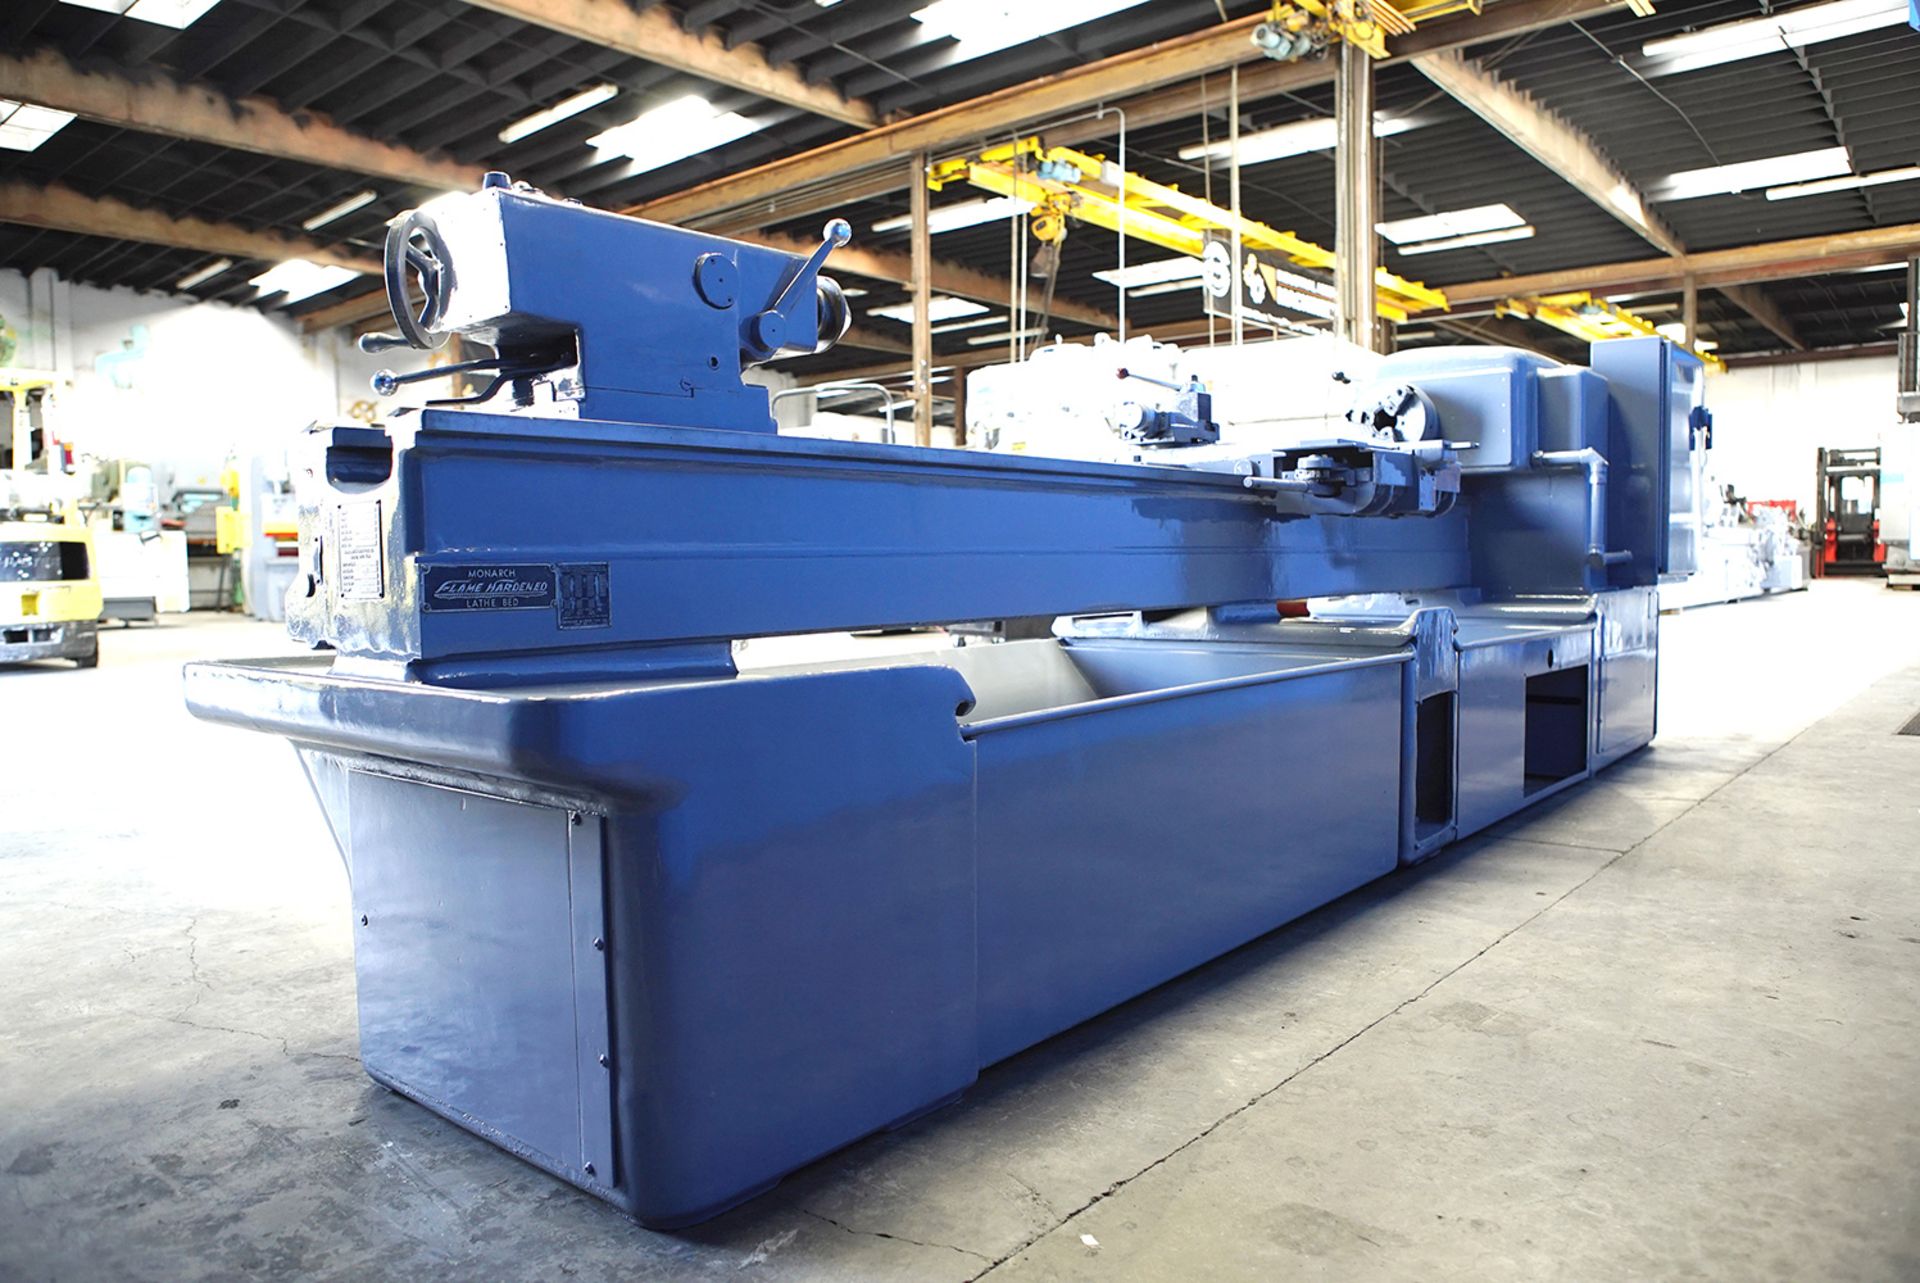 Monarch - Engine Lathe | 16" x 102", Located In Huntington Park, CA - #6430JVHP - Image 4 of 10